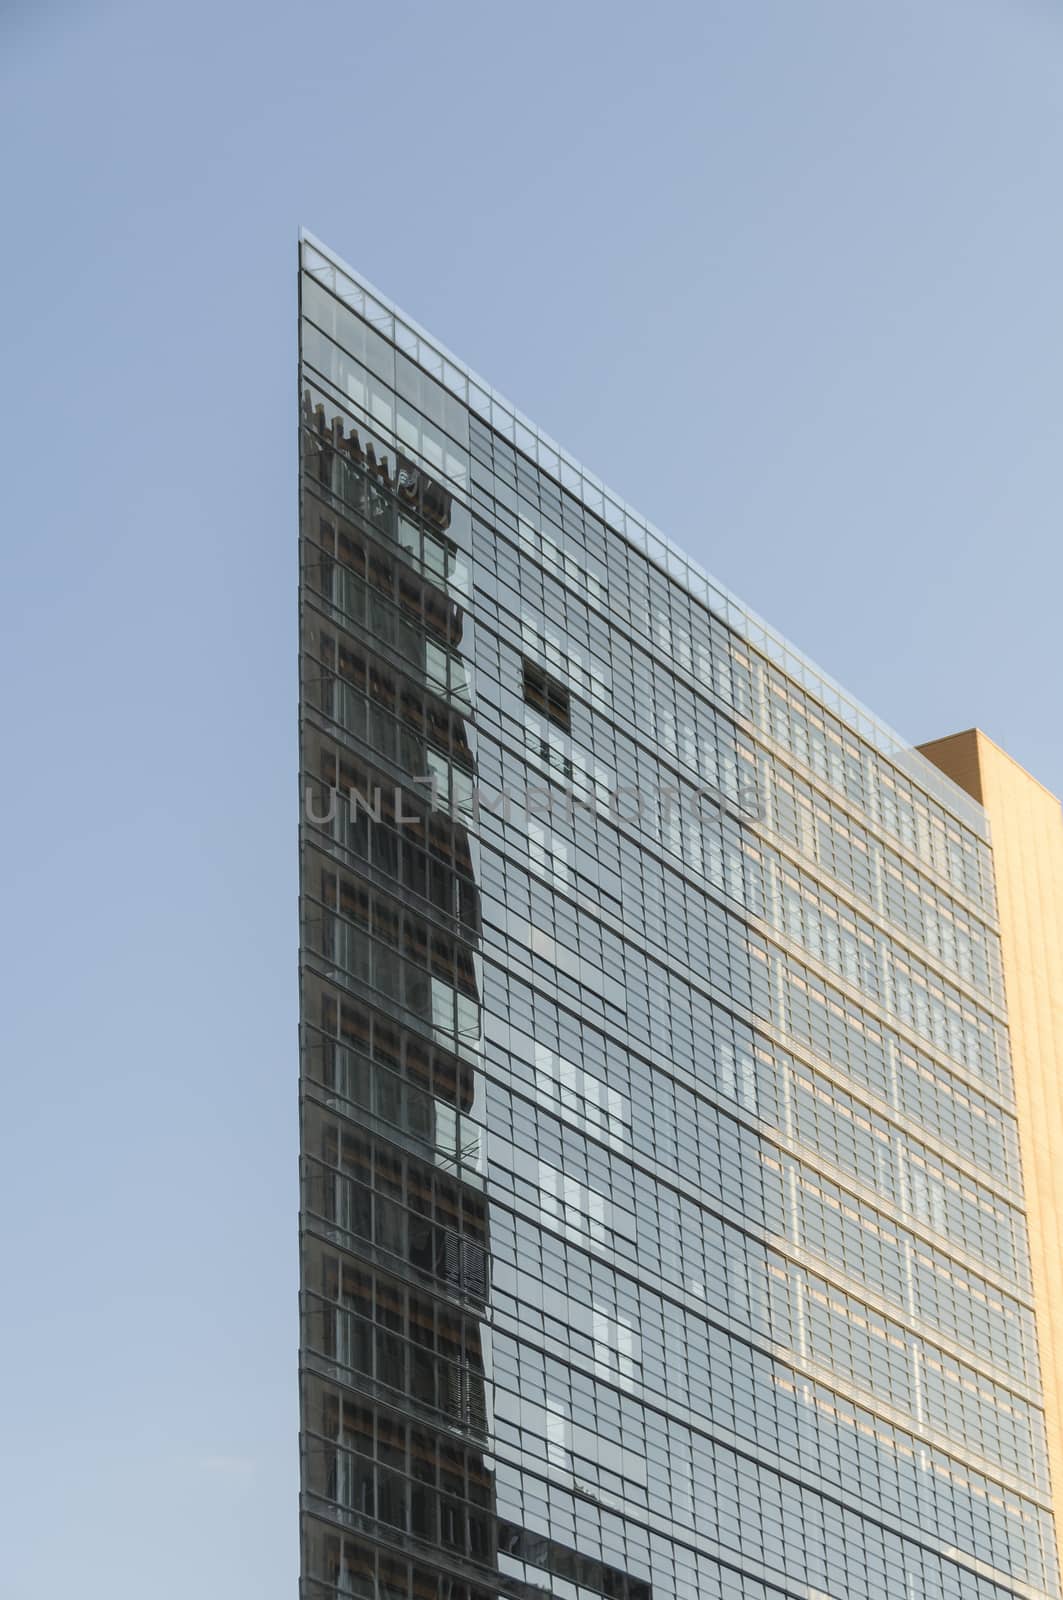 Sky reflected in the windows of a modern office building